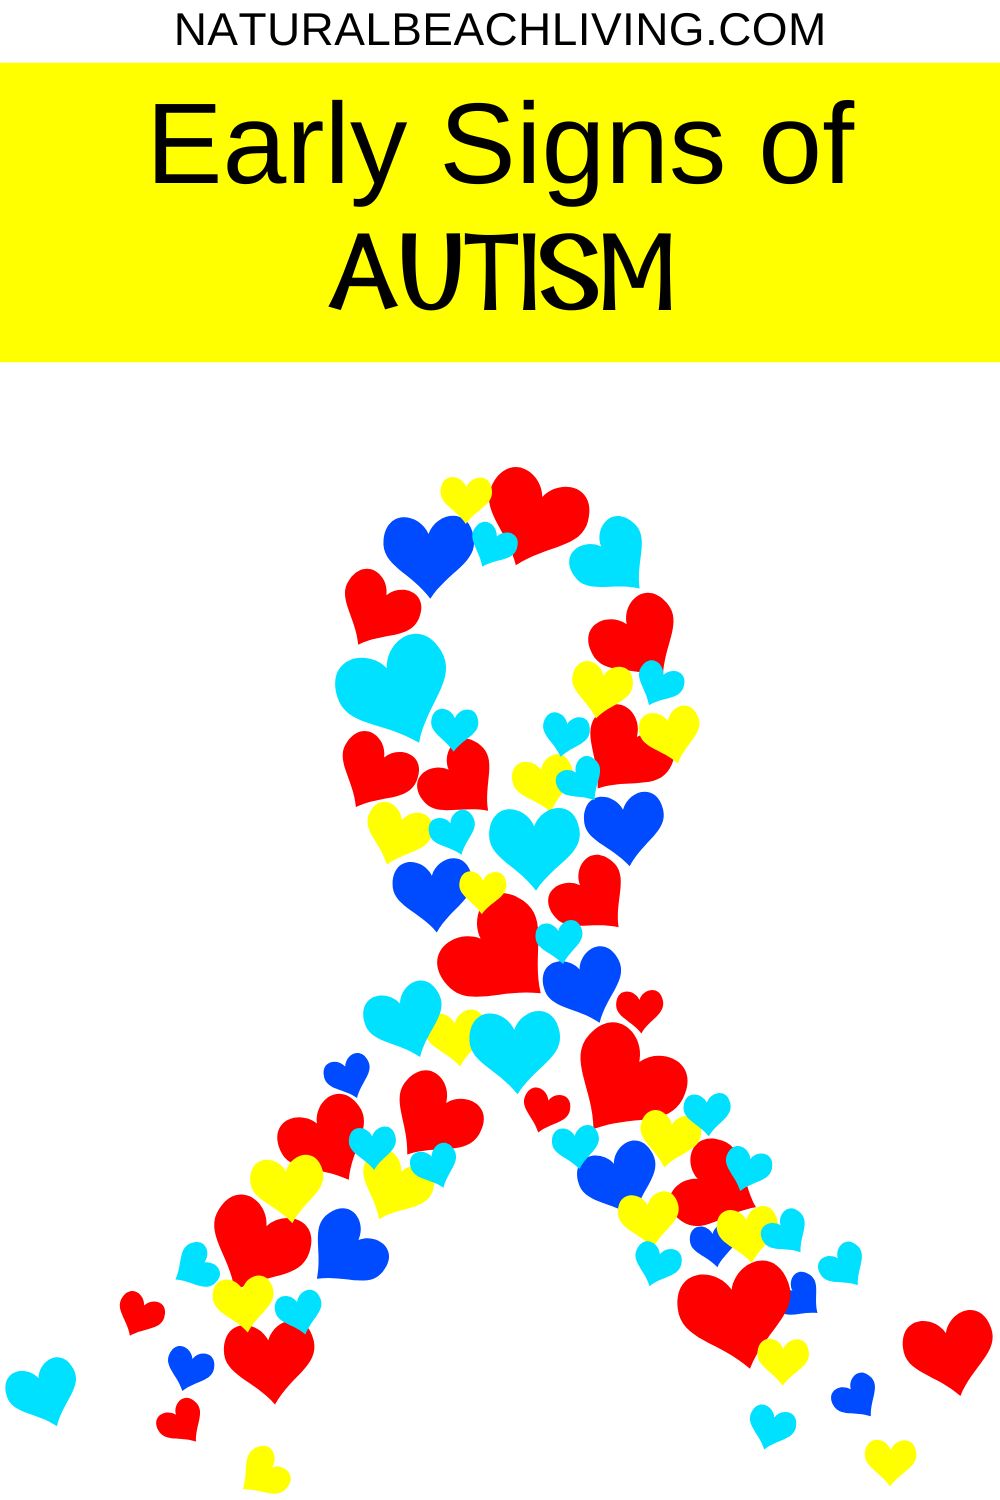 Early Signs of Autism: Recognizing the Red Flags in Children,  explore the early signs of autism and how to spot them. What are some of the Symptoms and Characteristics of Autism at different ages 